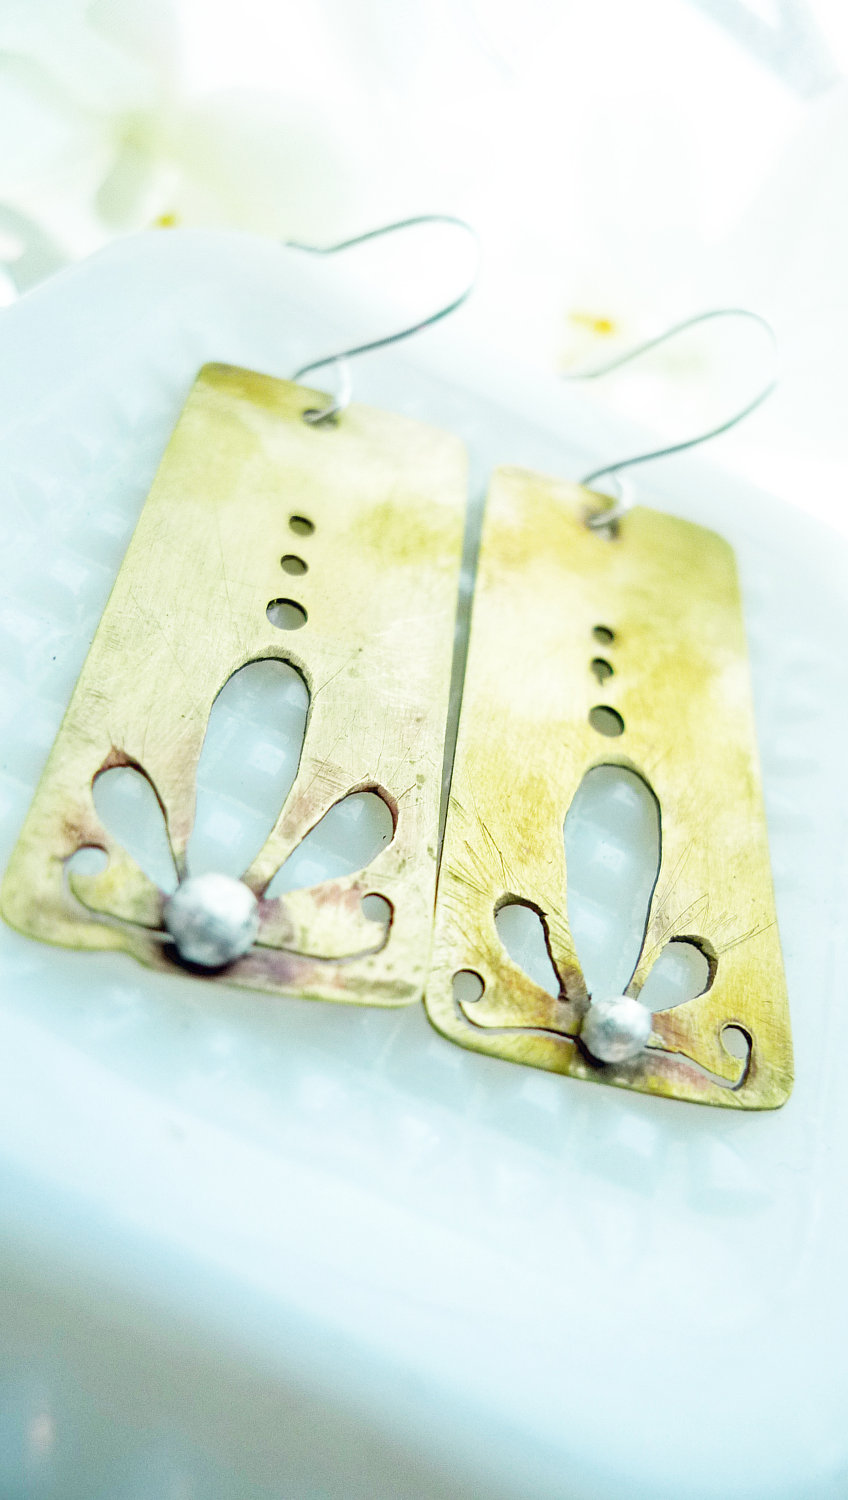 Earrings Brass Sterling Silver Organic Earrings With A Flower Petal Design-made To Order